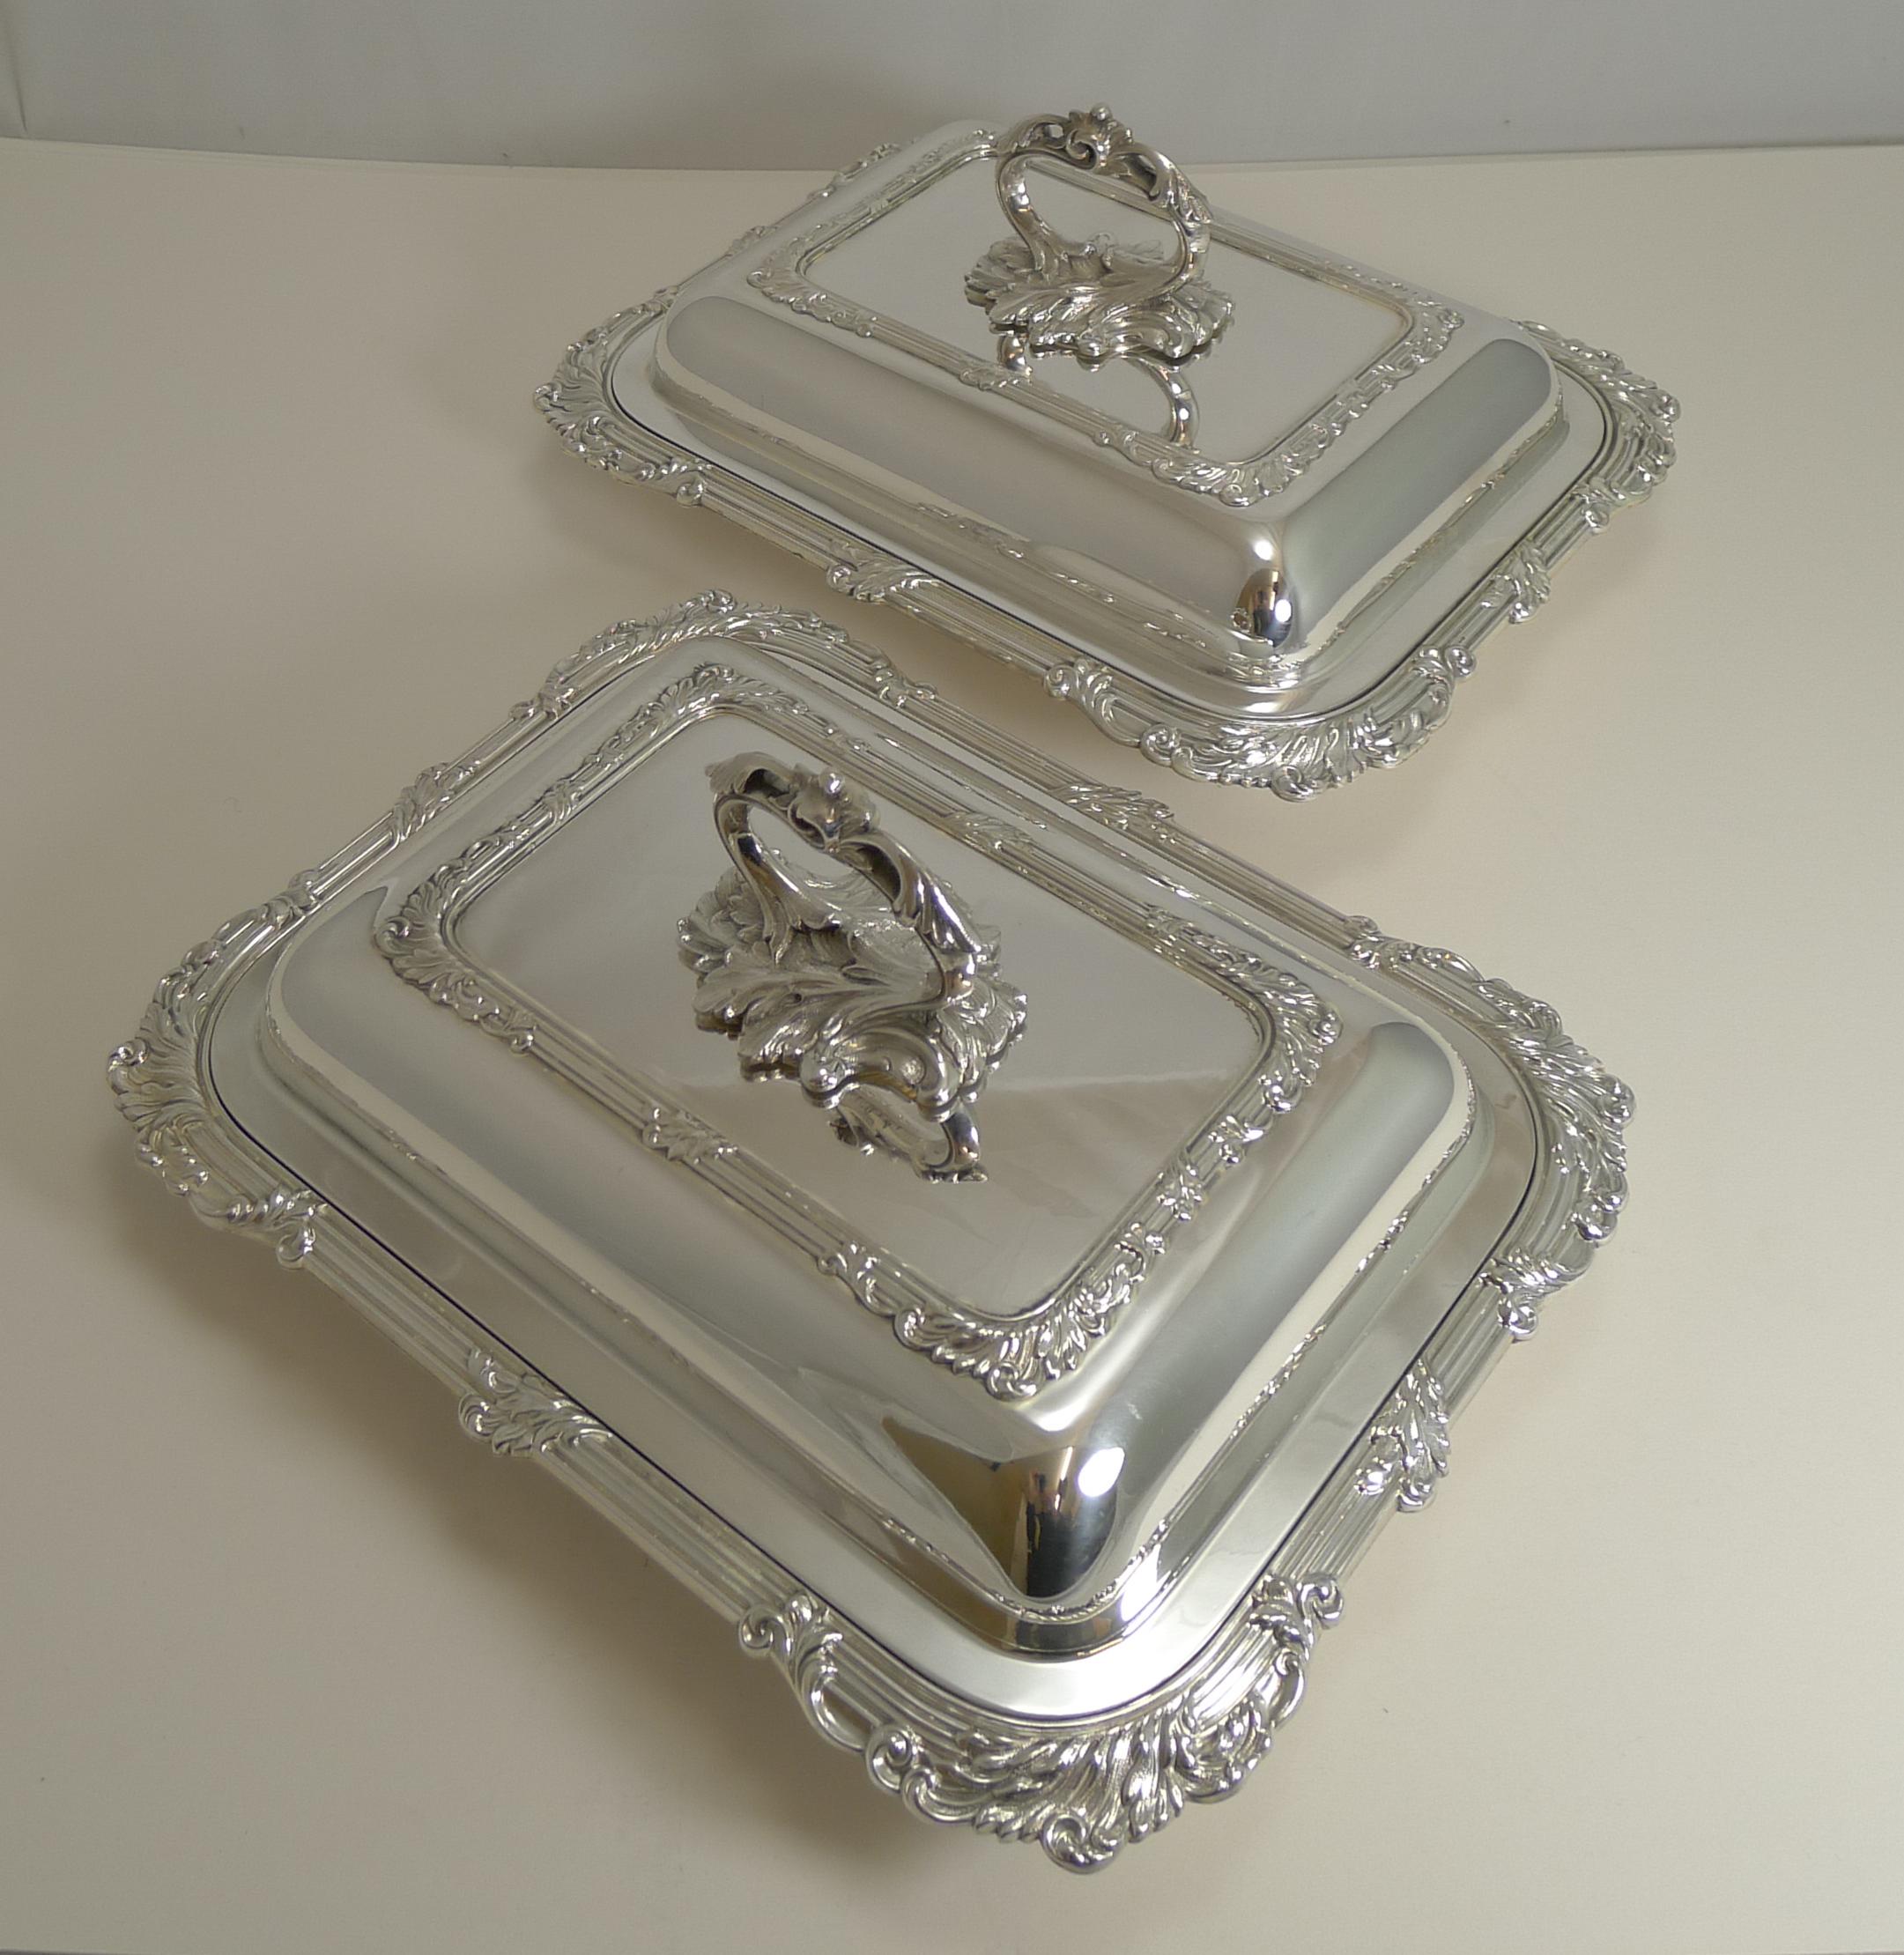 Pair of Antique English Silver Plated Entree Dishes by James Dixon & Sons 8